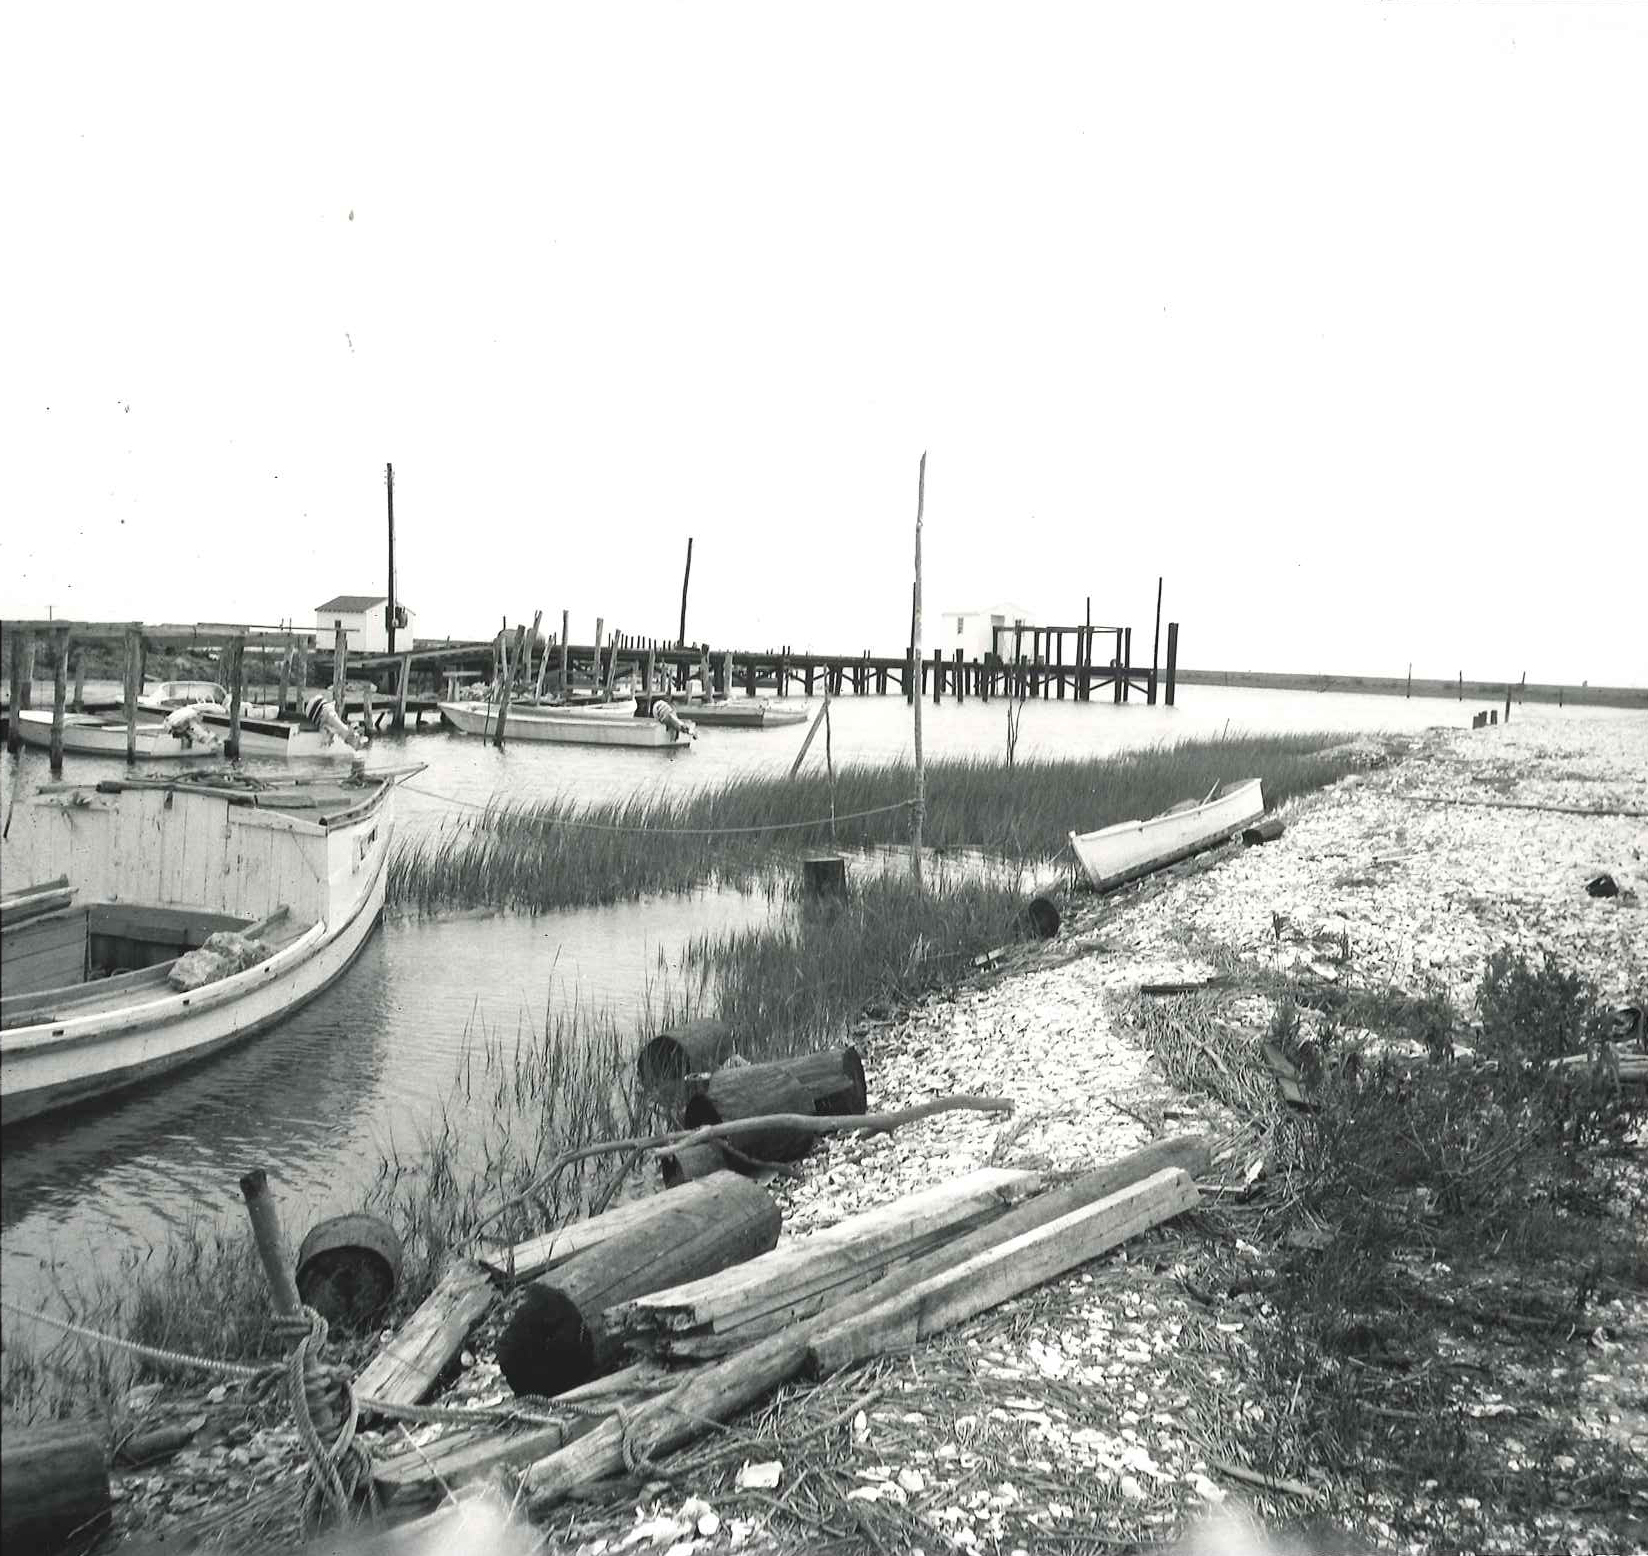 Looking over what is now the ESL boat basin, 1963